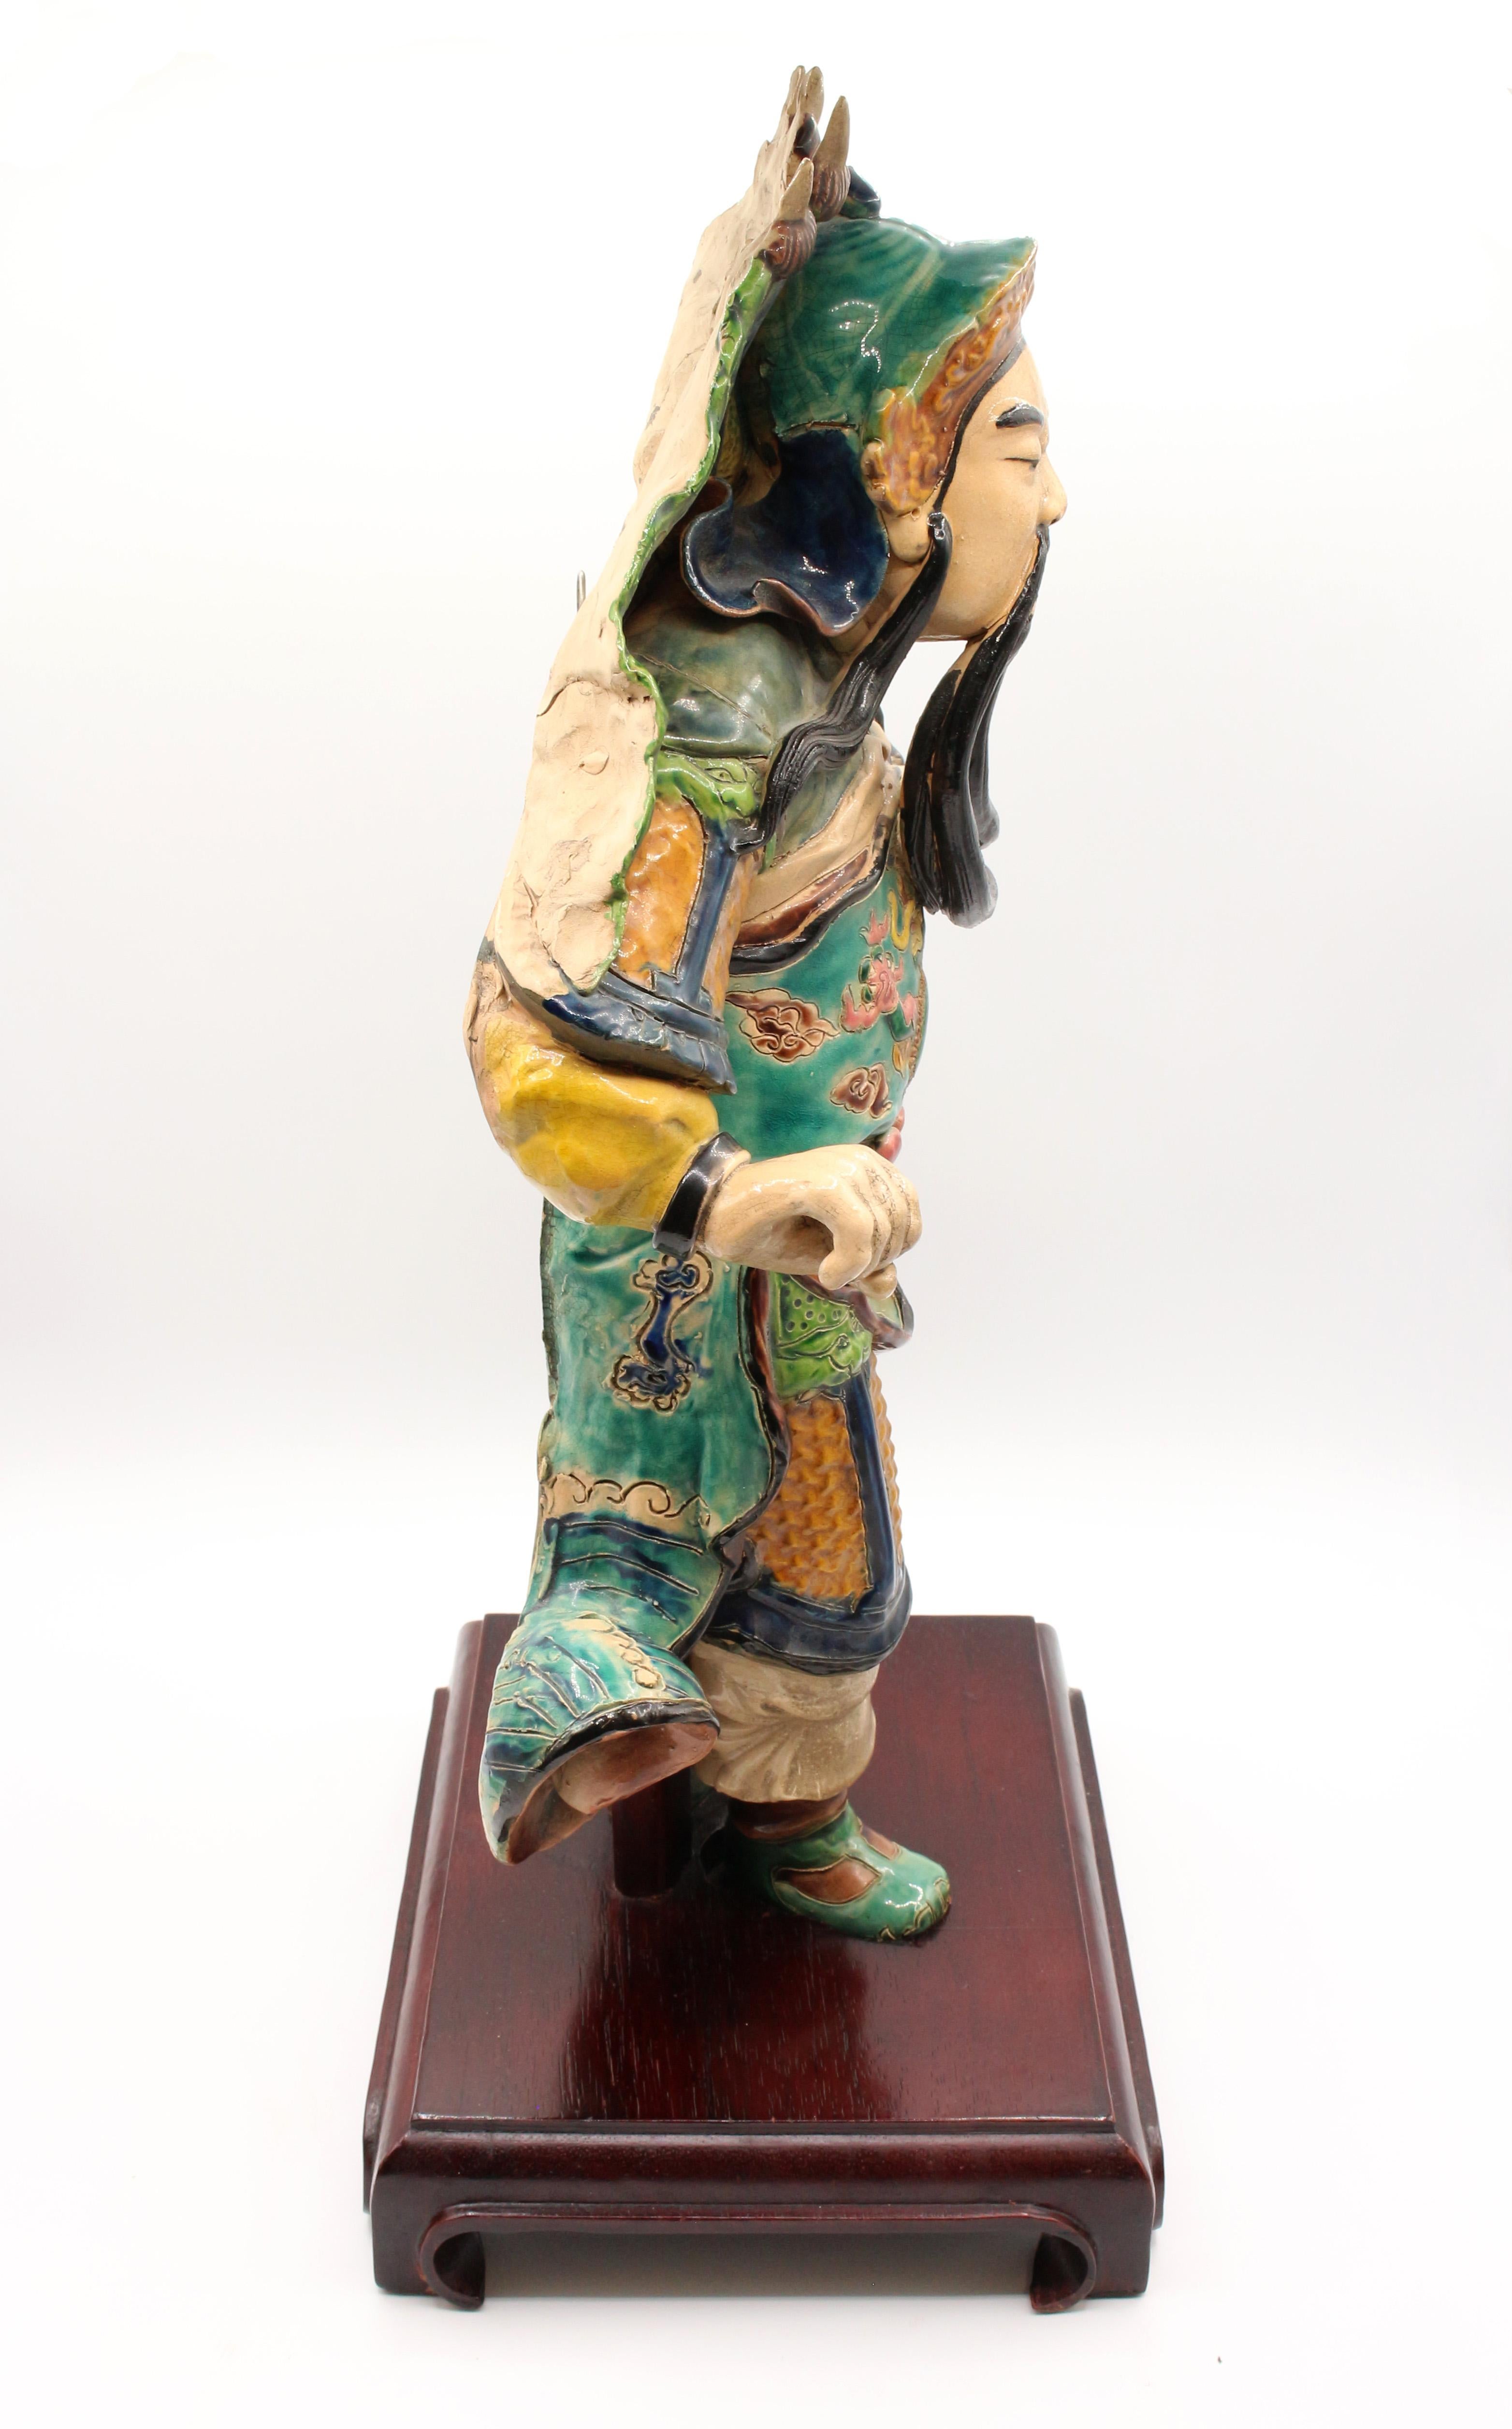 Polychromed Late 19th Century Chinese Roof Tile Figure